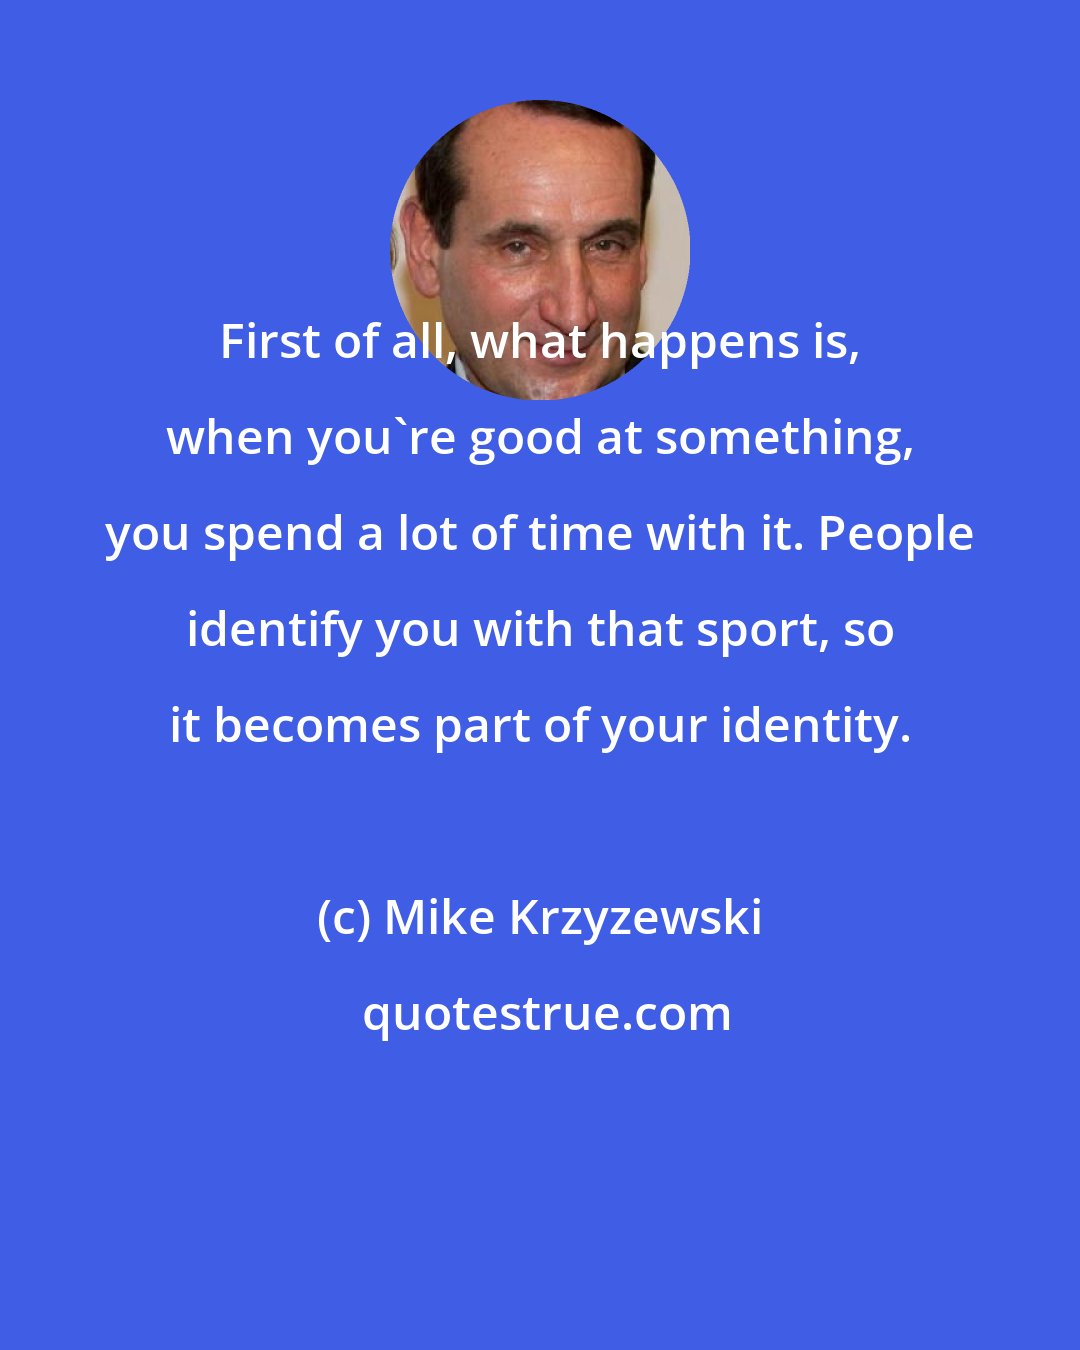 Mike Krzyzewski: First of all, what happens is, when you're good at something, you spend a lot of time with it. People identify you with that sport, so it becomes part of your identity.